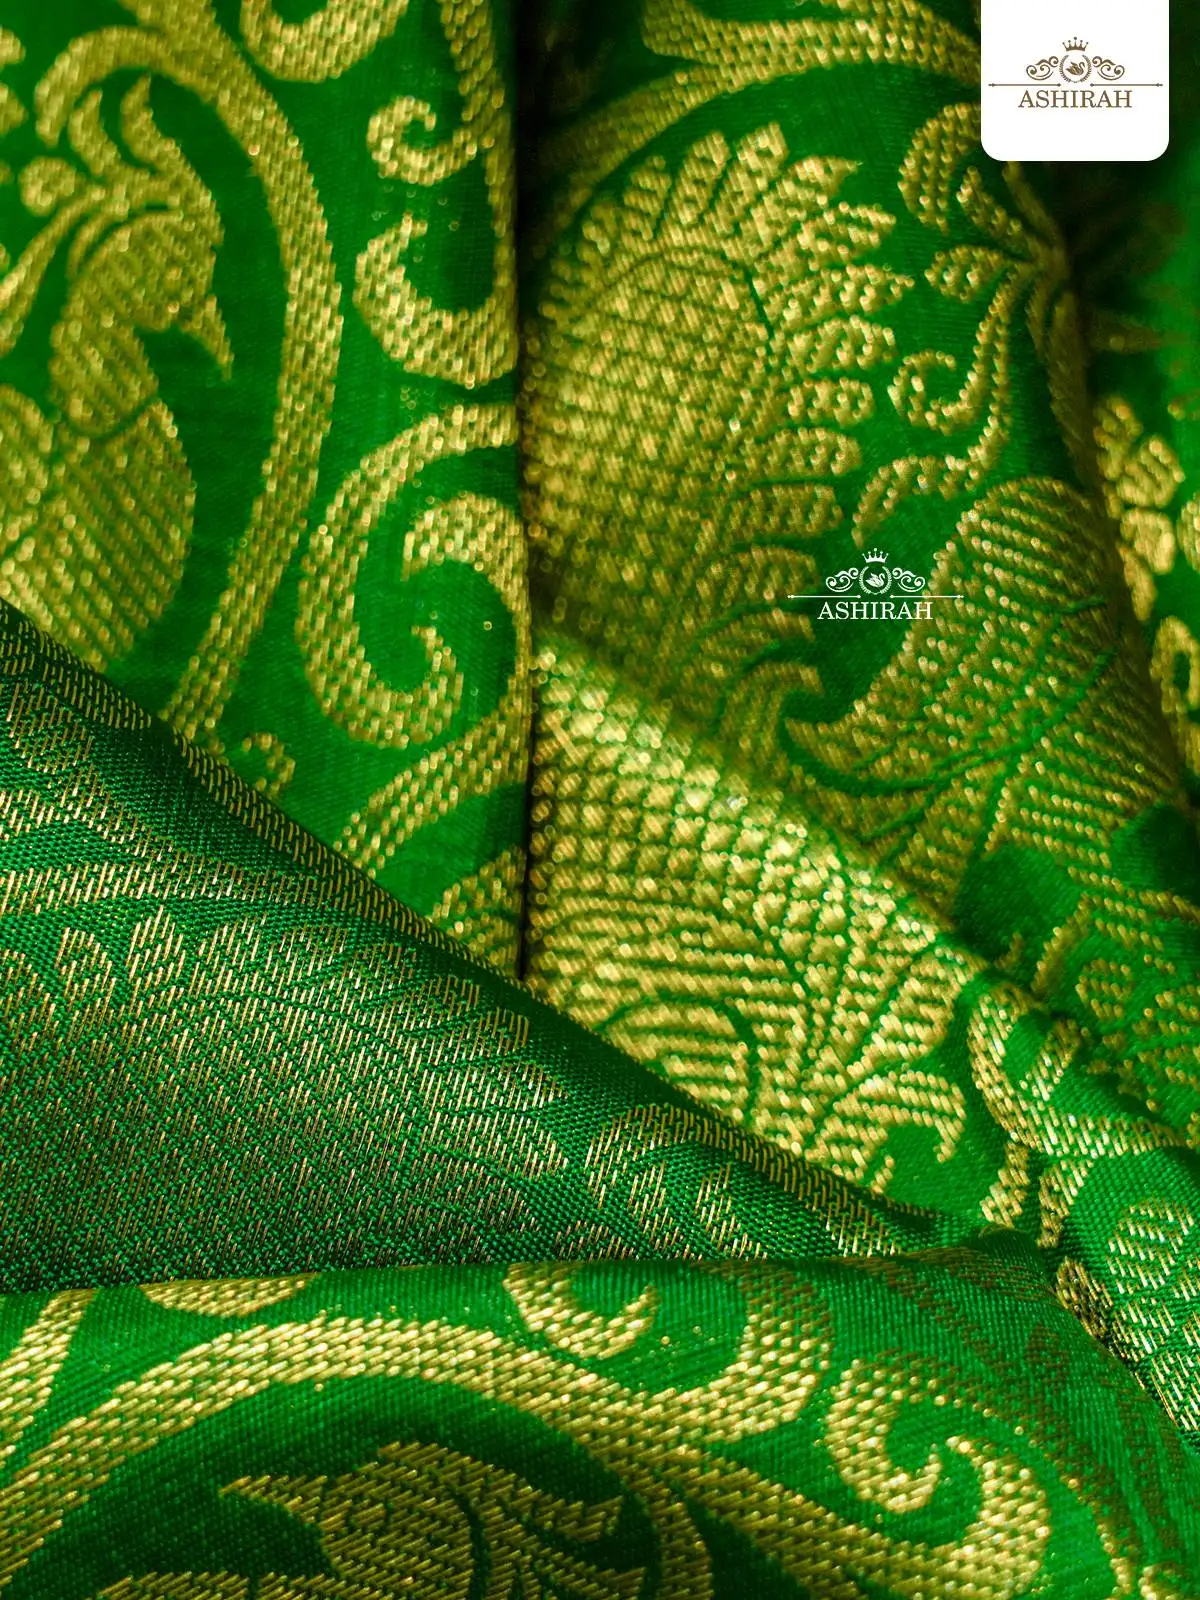 Green Pure Kanchipuram Silk Saree With Peacock Motifs On The Body And Without Border